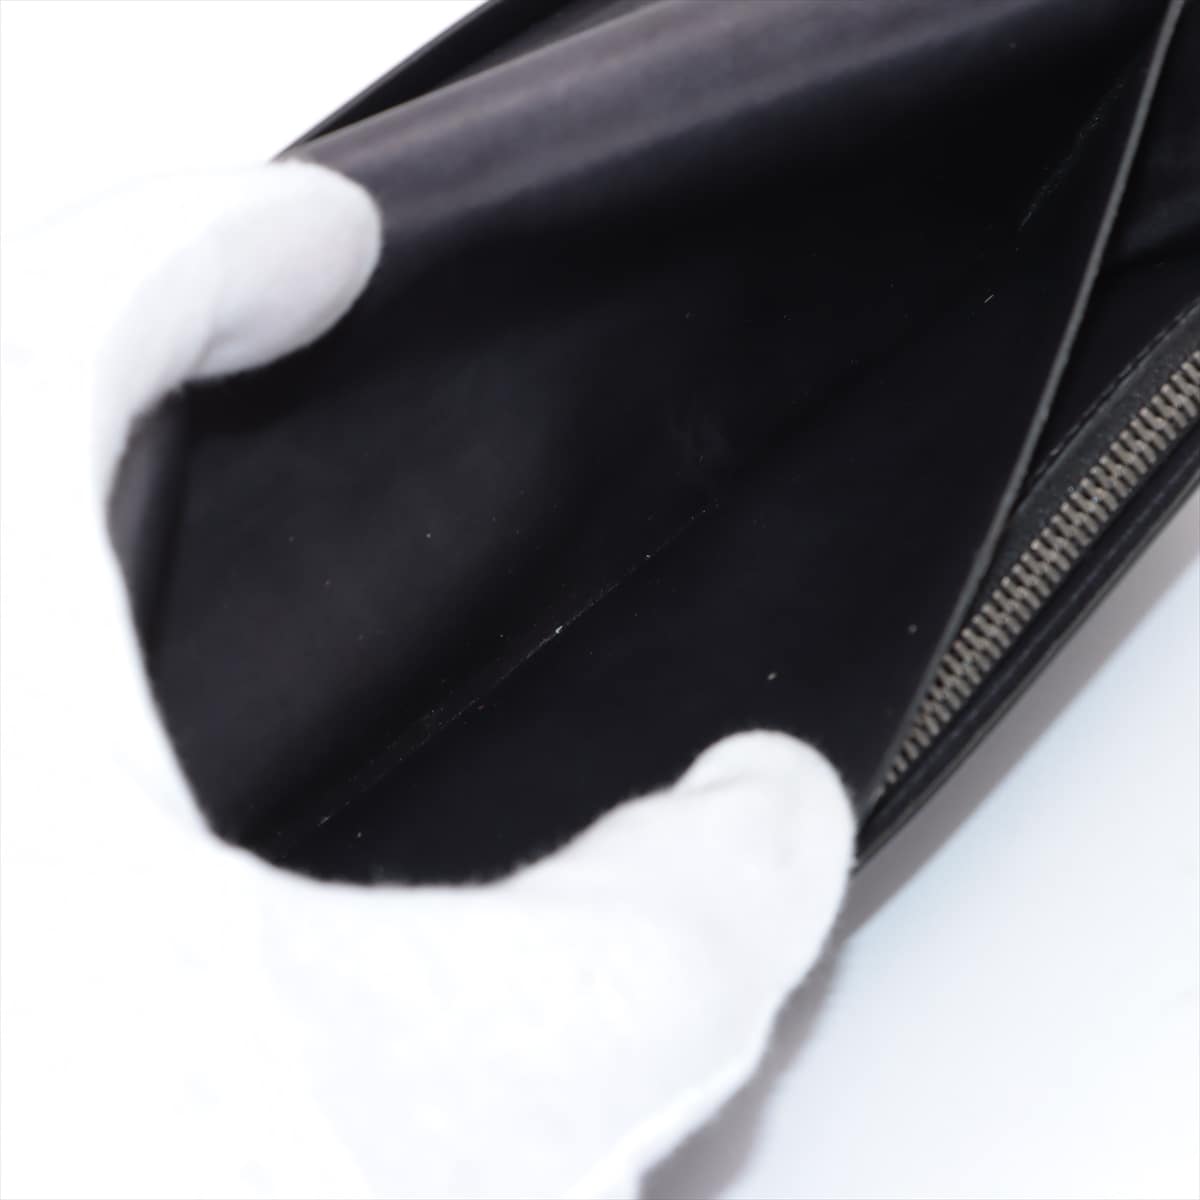 Berluti Calligraphy Leather Wallet Black Rubbing off